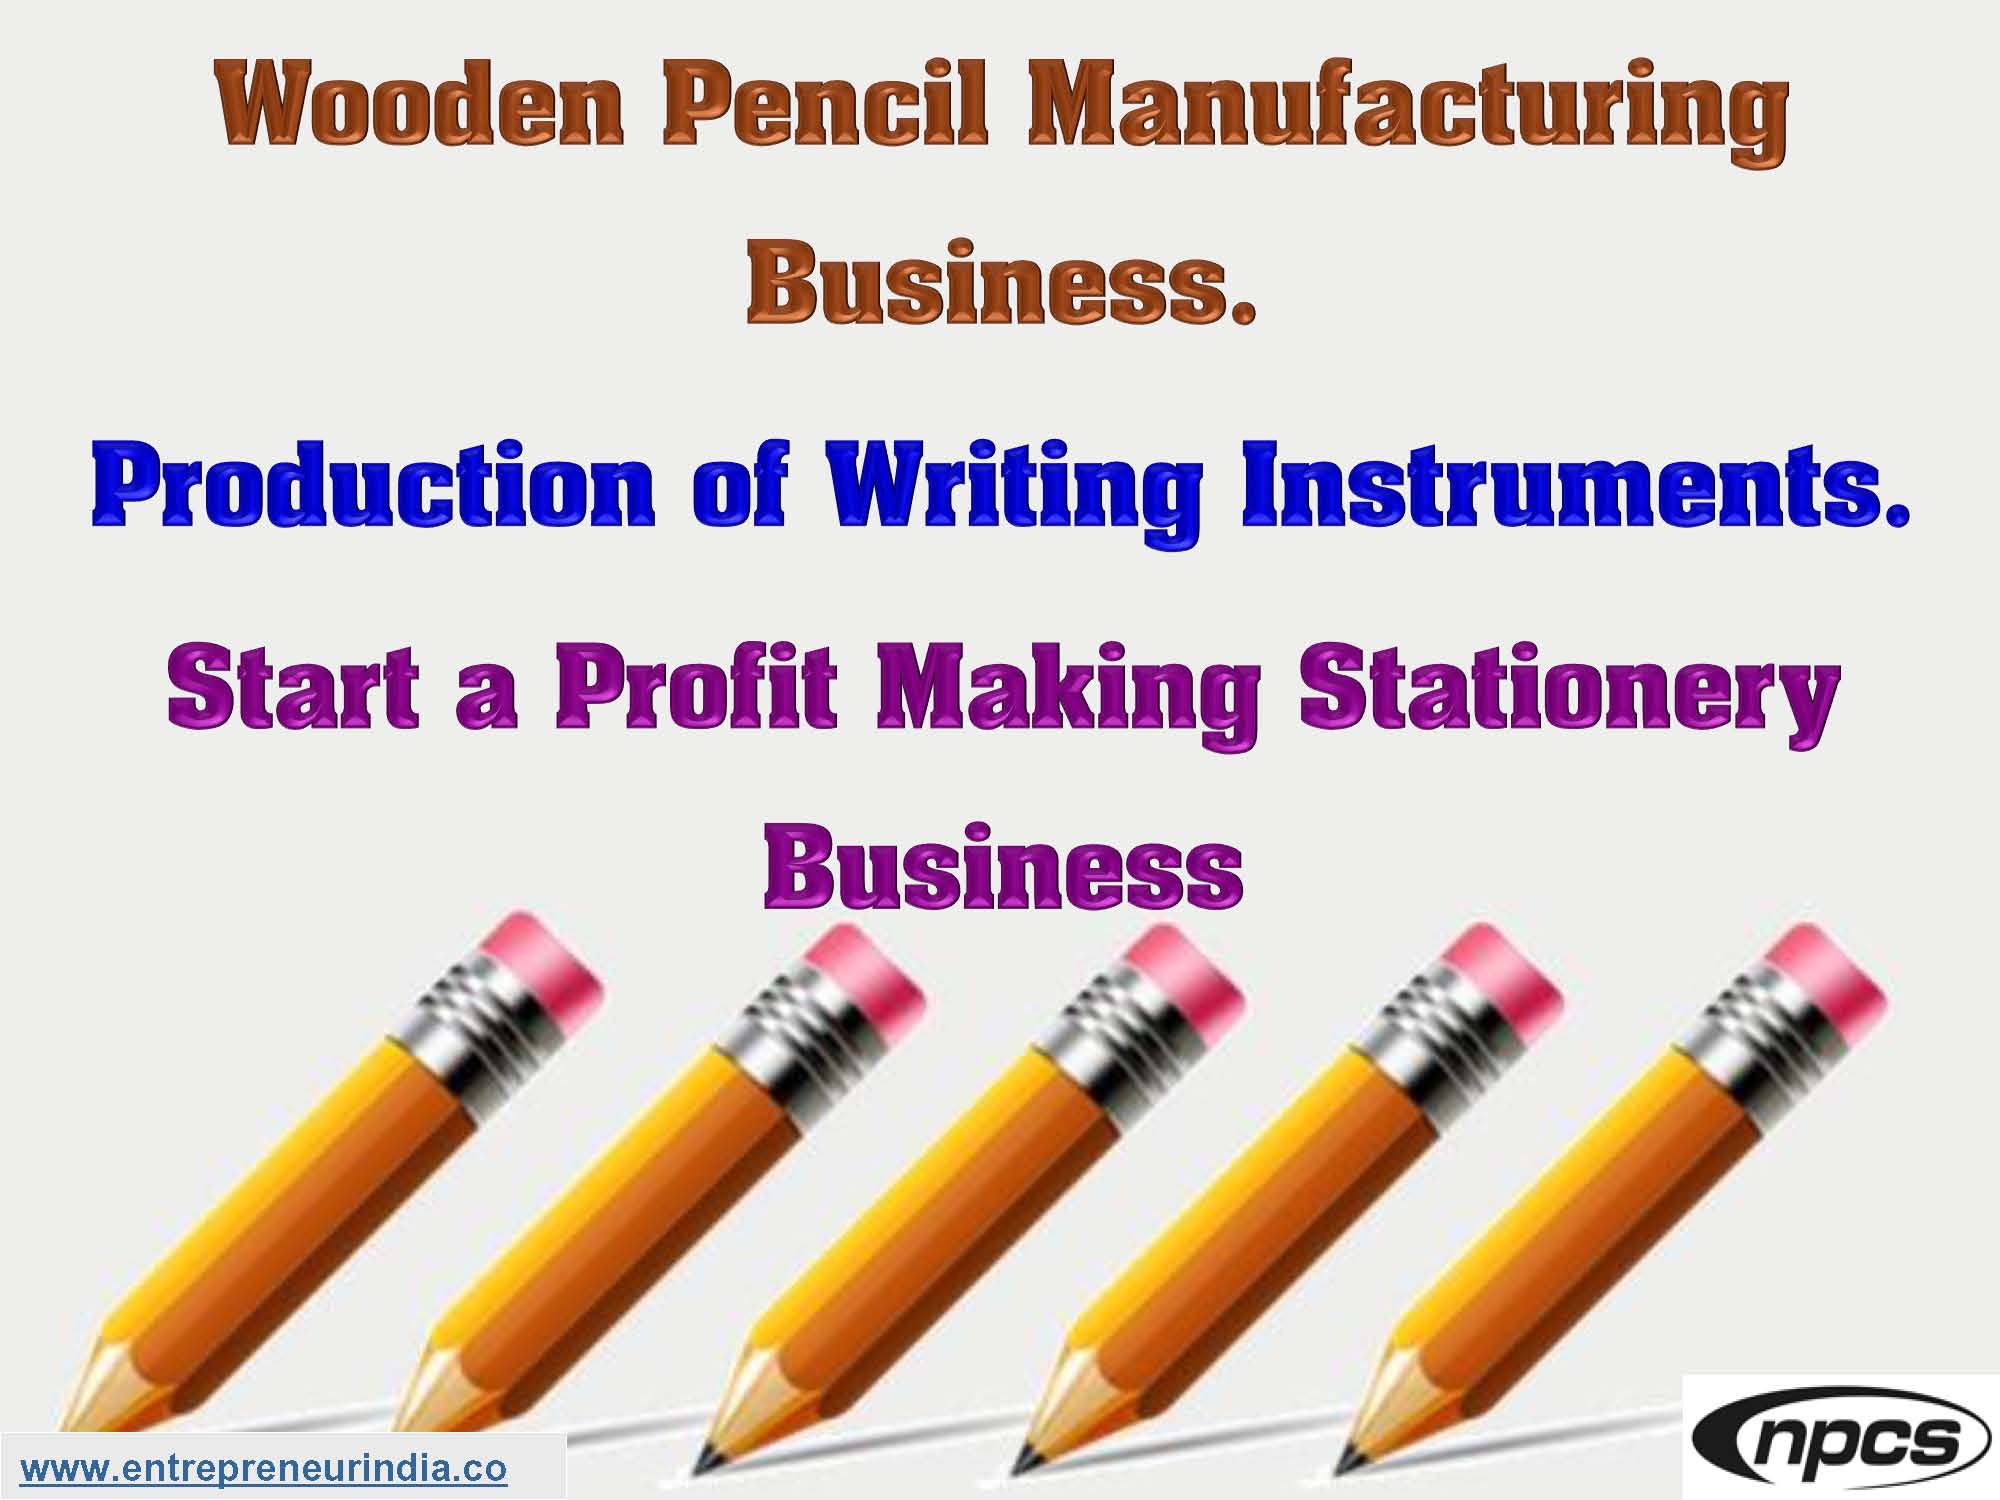 Wooden Pencil Manufacturing Business